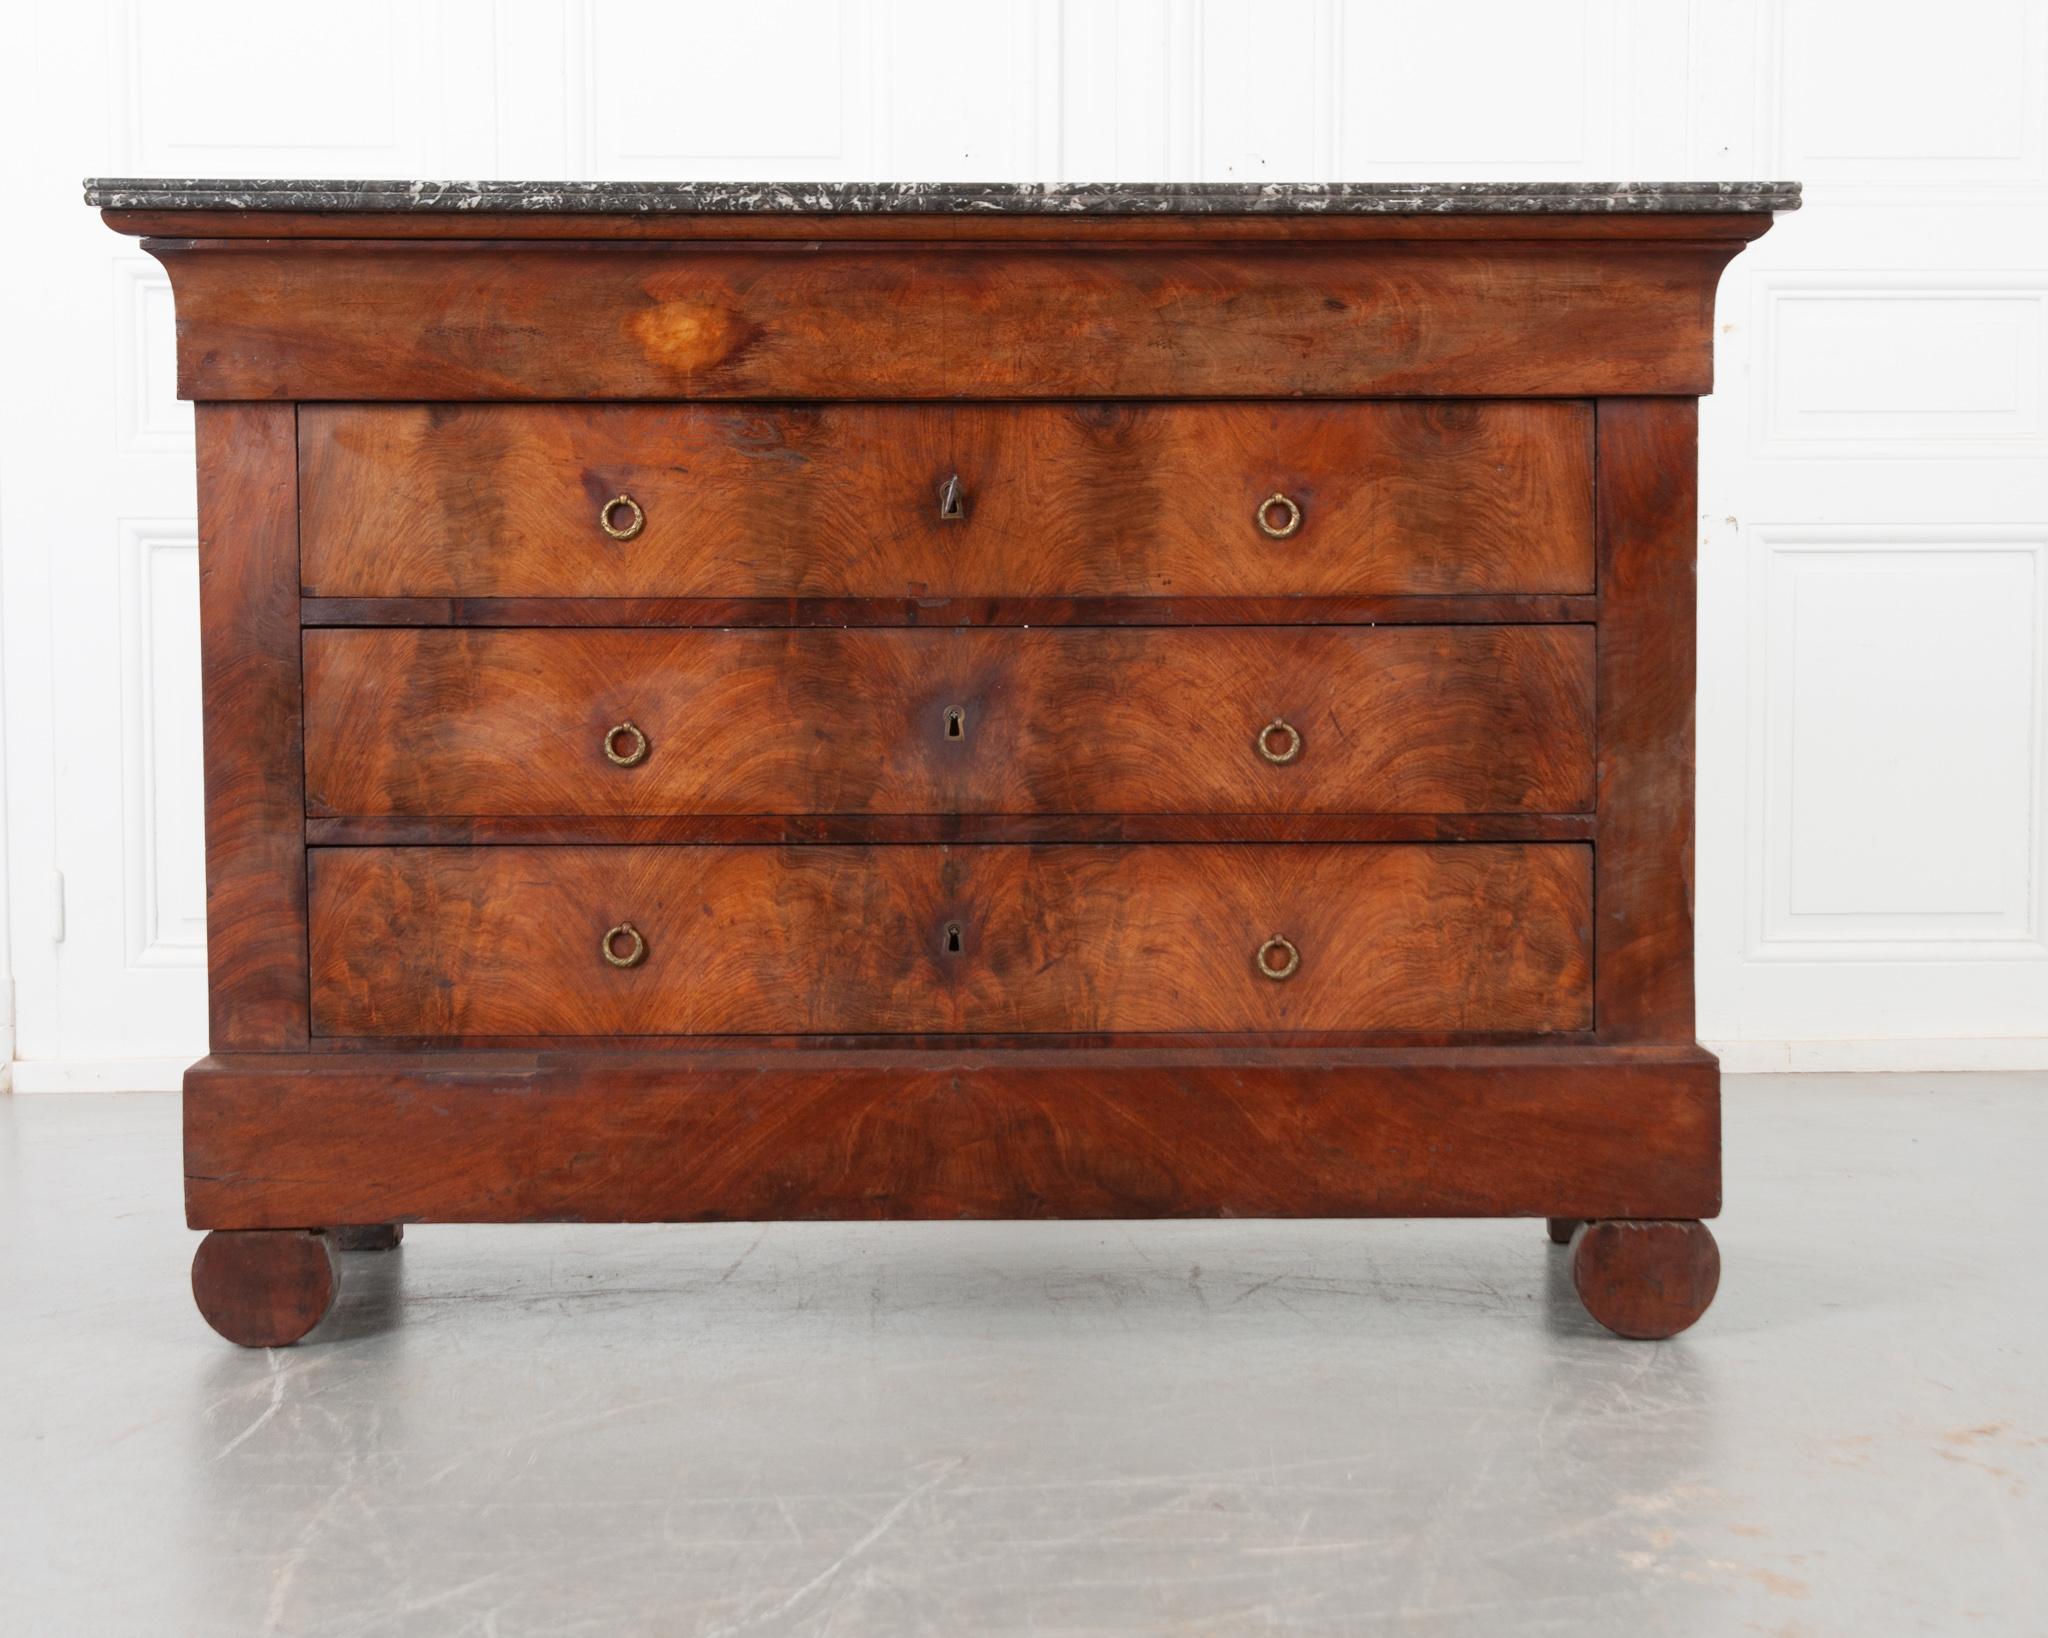 A fabulous French mahogany commode from 19th century France, circa 1840’s. The stunning gray and white marble top with rounded front corners is in good antique condition with few signs of wear. The apron houses a hidden drawer, free of hardware.